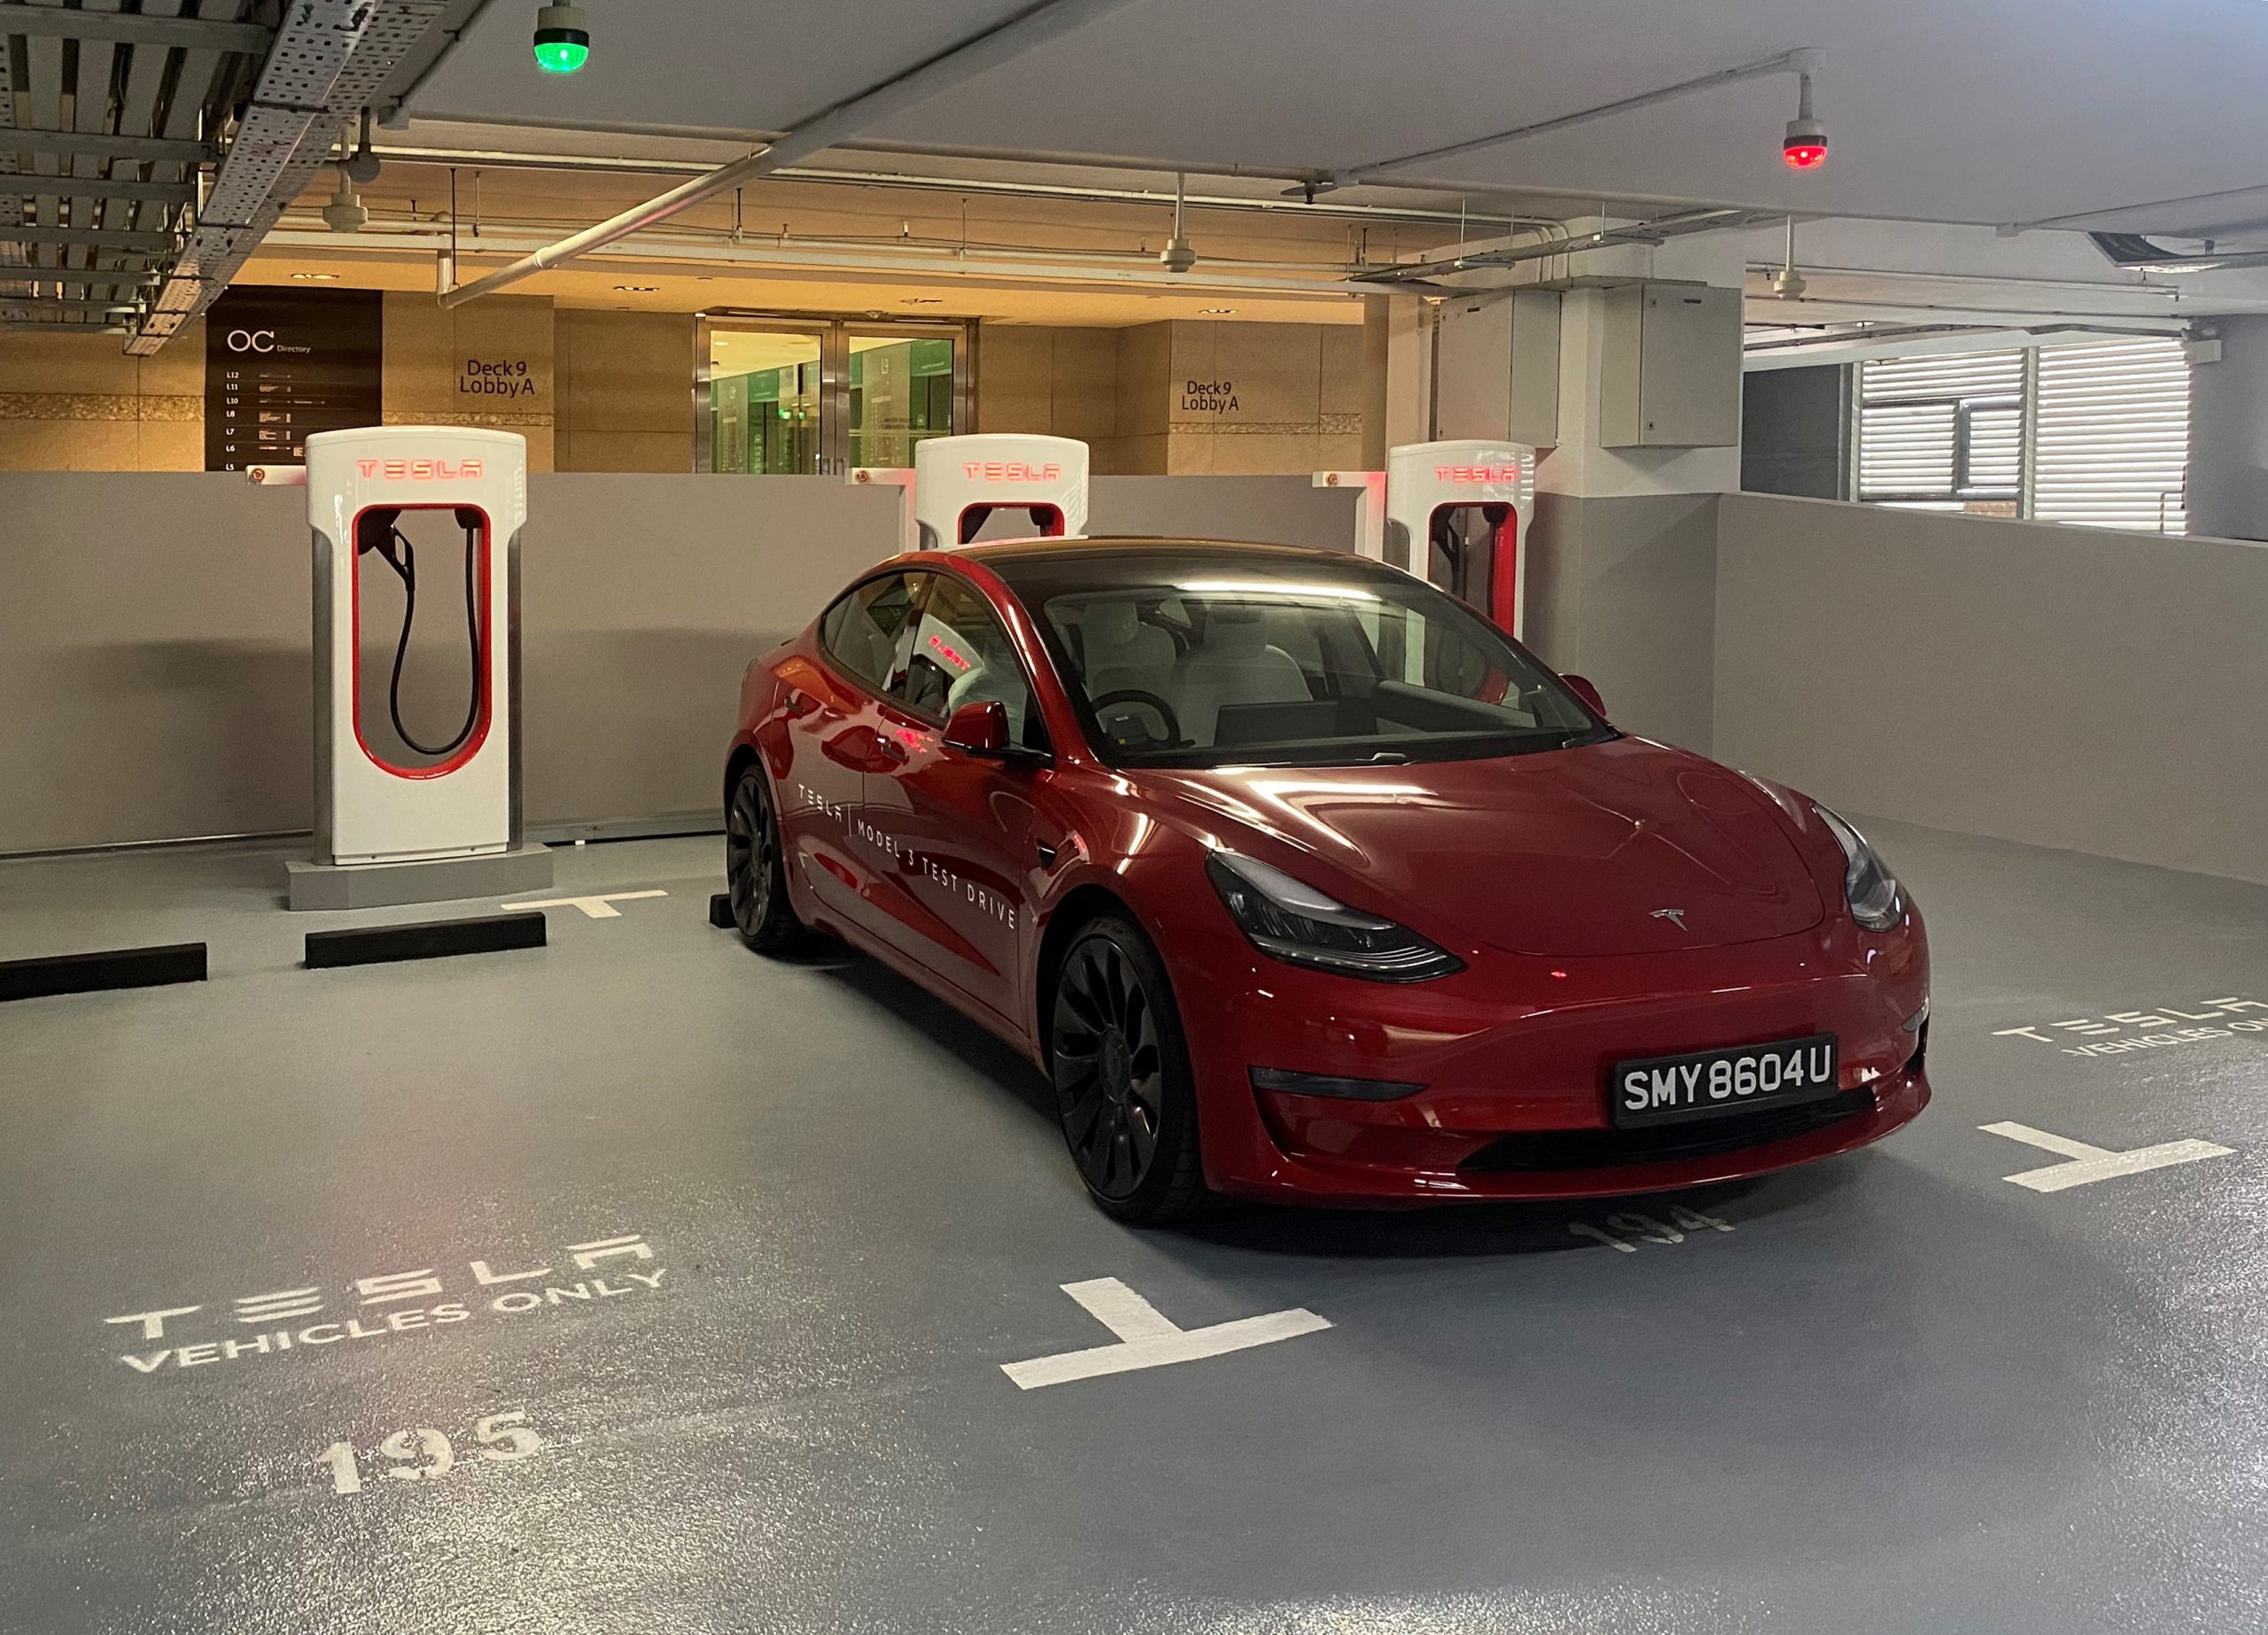 New Tesla V3 Superchargers charging station is now open to public at